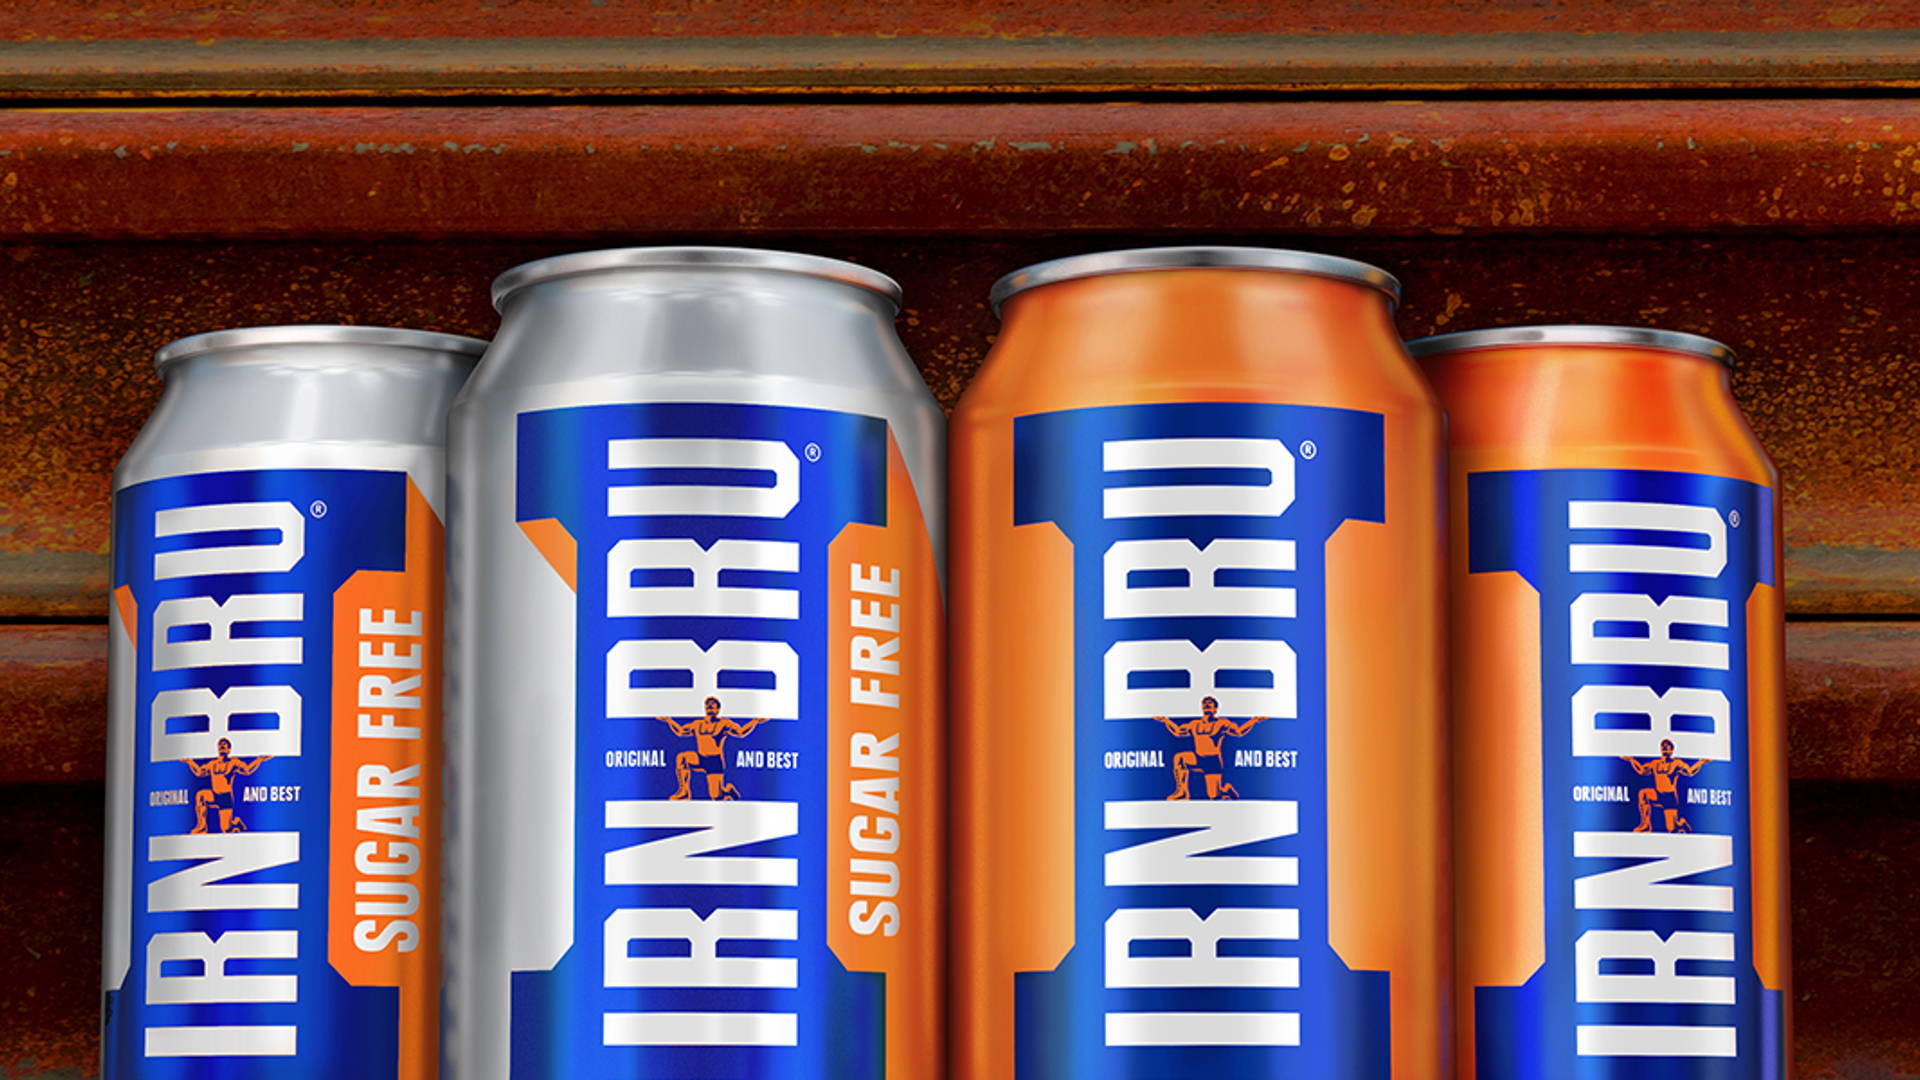 IRN-BRU Barr Irn Bru Limited Edition Pint Glass Boxed Iron Brew Scarecrow Packaging 